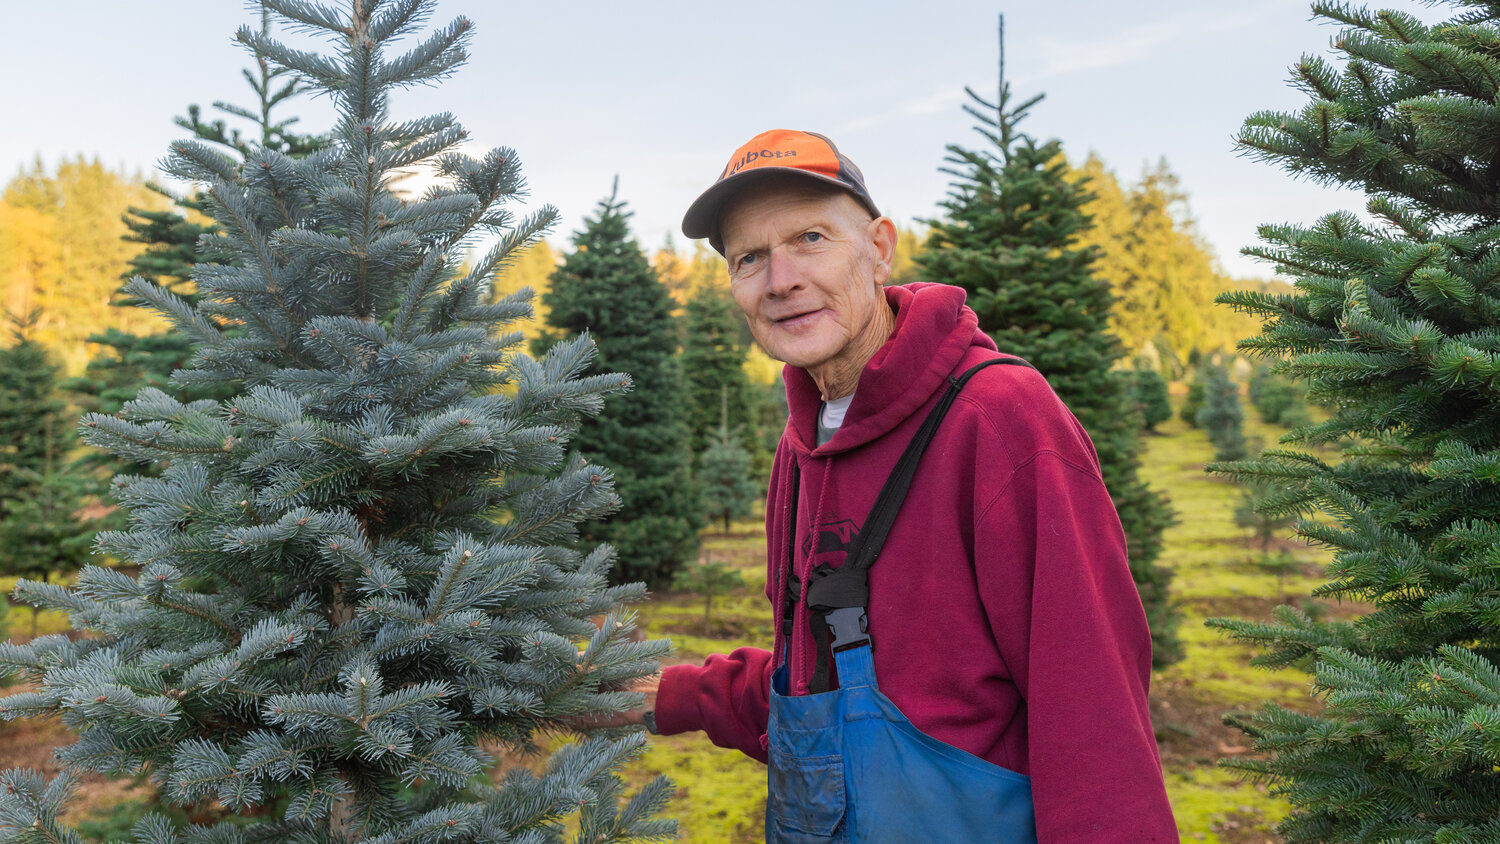 Don Tapio smiles while standing next to a Blue Spruce, at the Christmas Valley Tree Farm in Rochester on Monday, describing the “pokey,” nature of the pines as an option for cat owners to protect their ornaments.